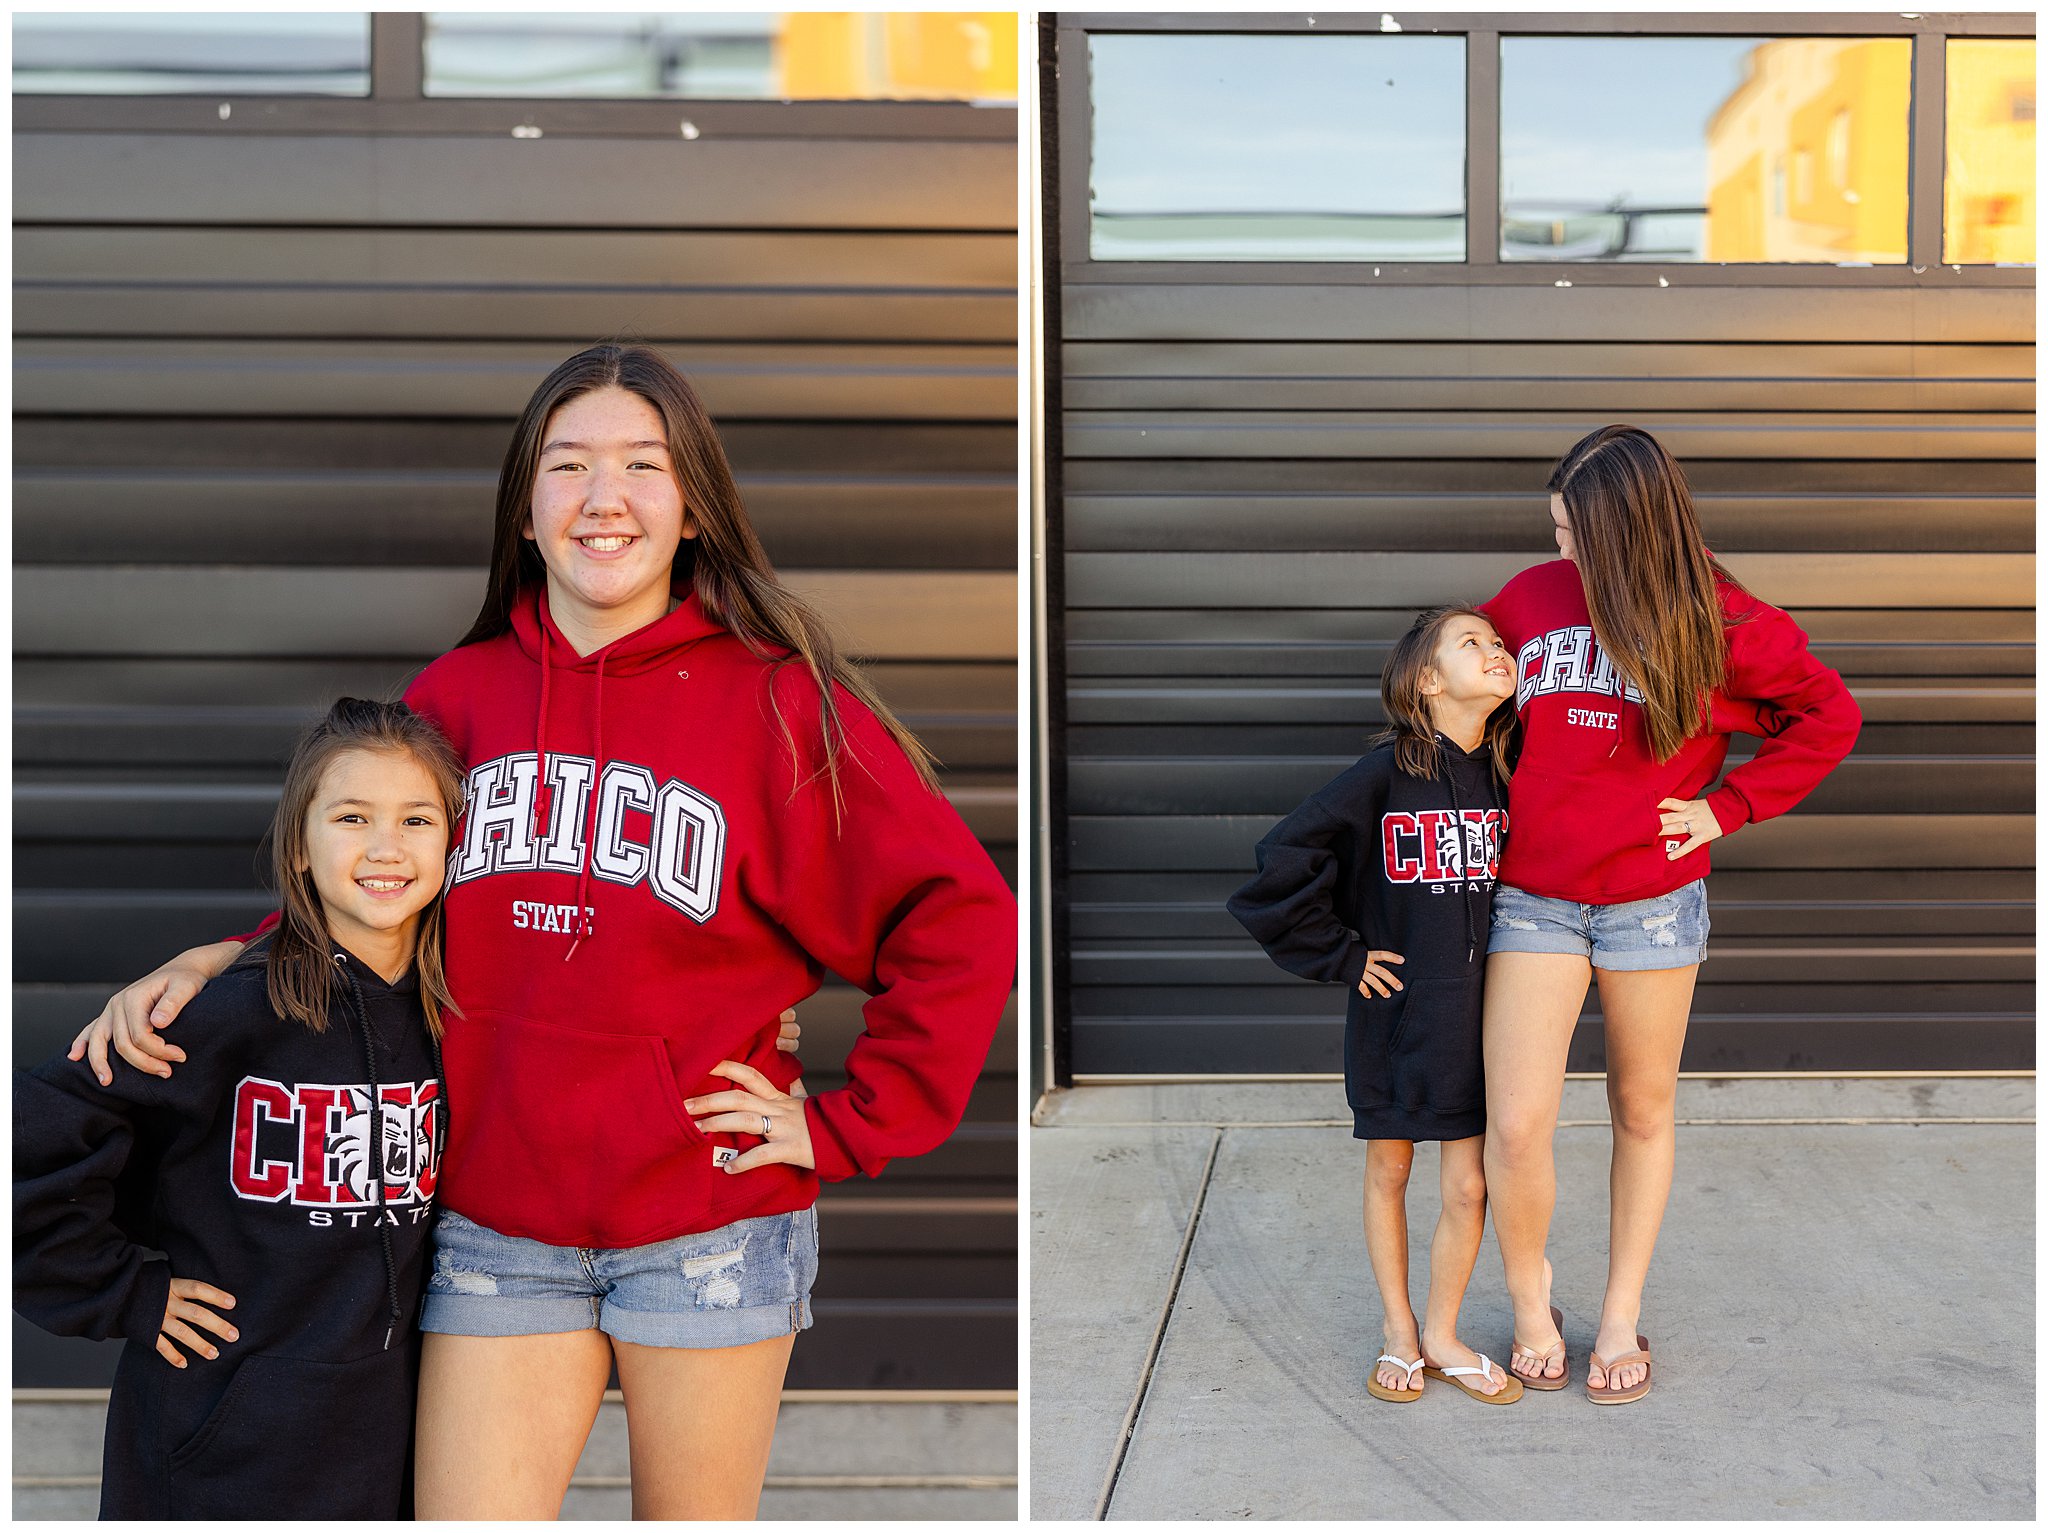 Meriam Park Family Session Chico CA Chico State Sweatshirts Annual Picture Tradition_0022.jpg